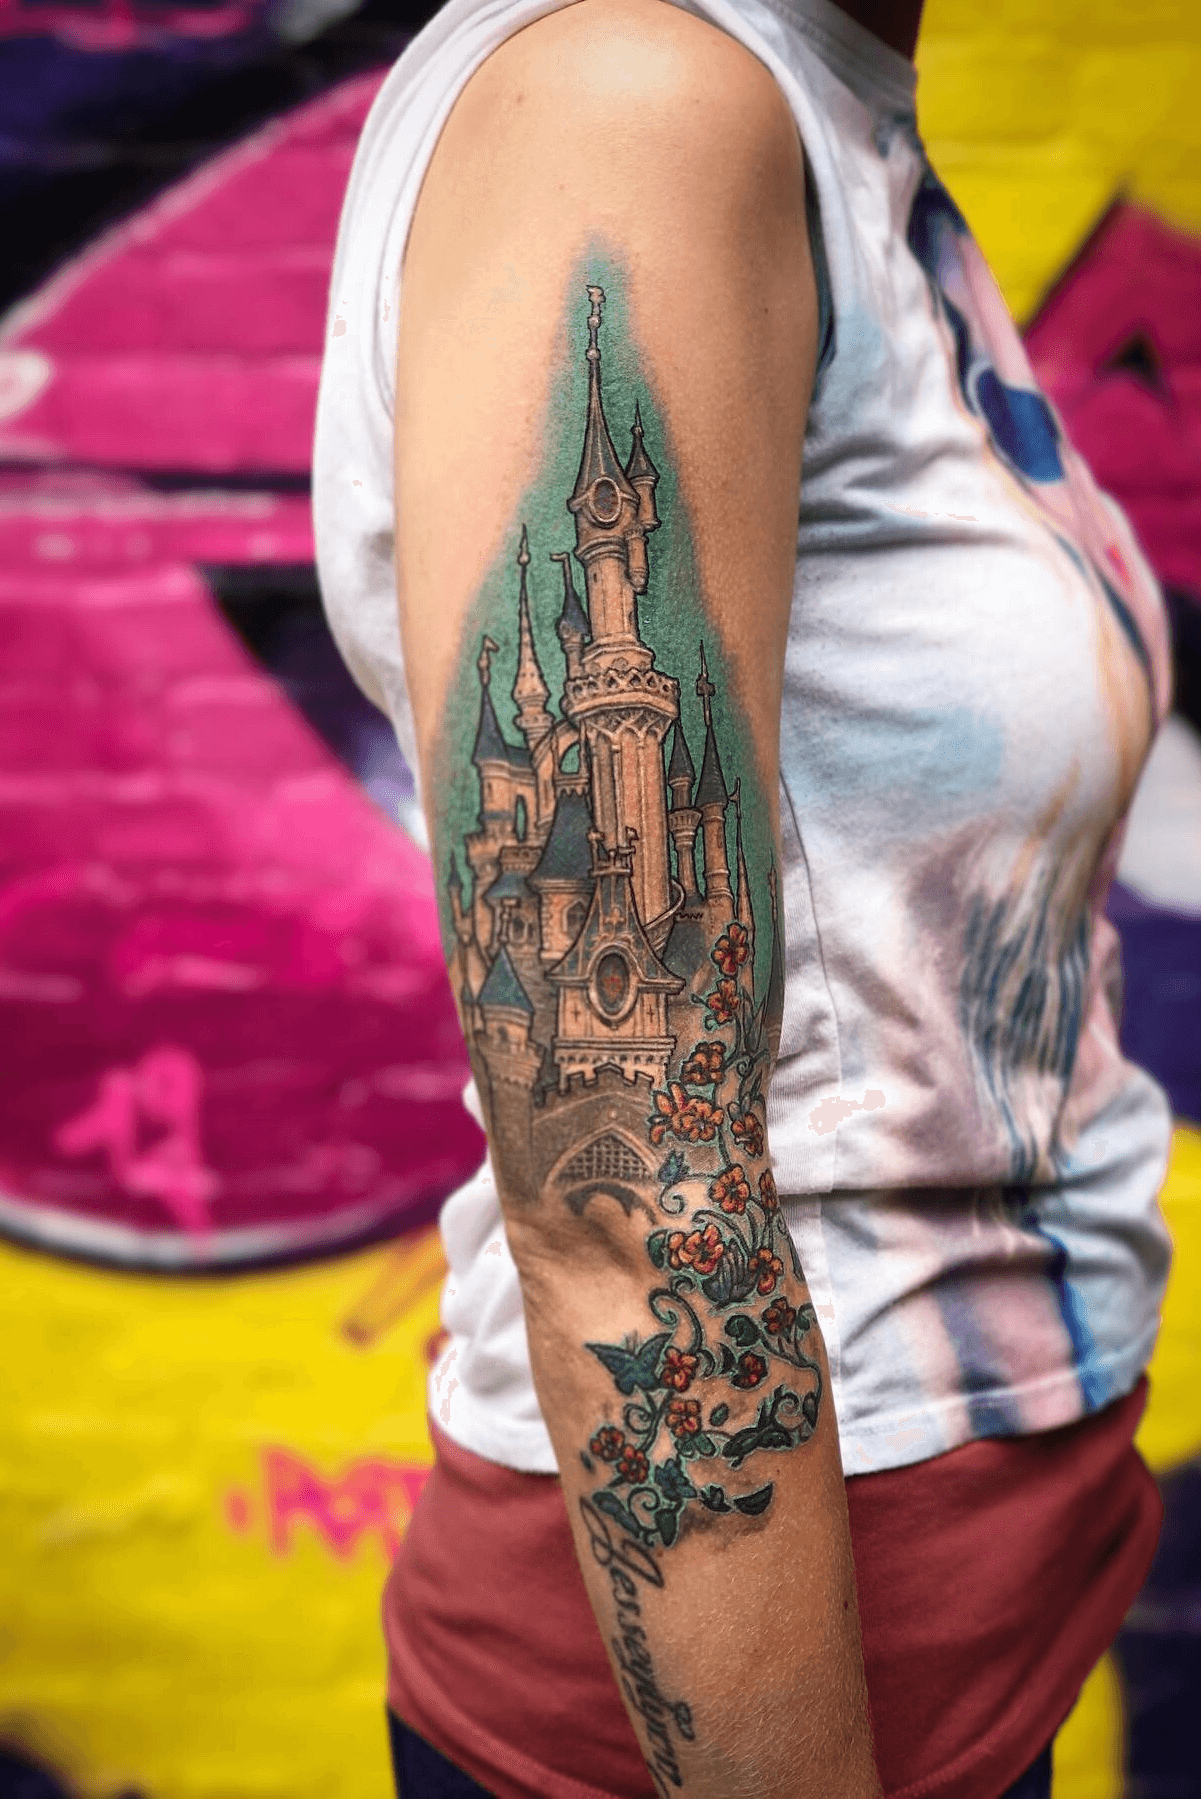 Modern Moose Studios  3 By Bri 3 Jessenia and I have been knocking out  this Disney Princess half sleeve little by little over the course of 2019  I love tattooing her